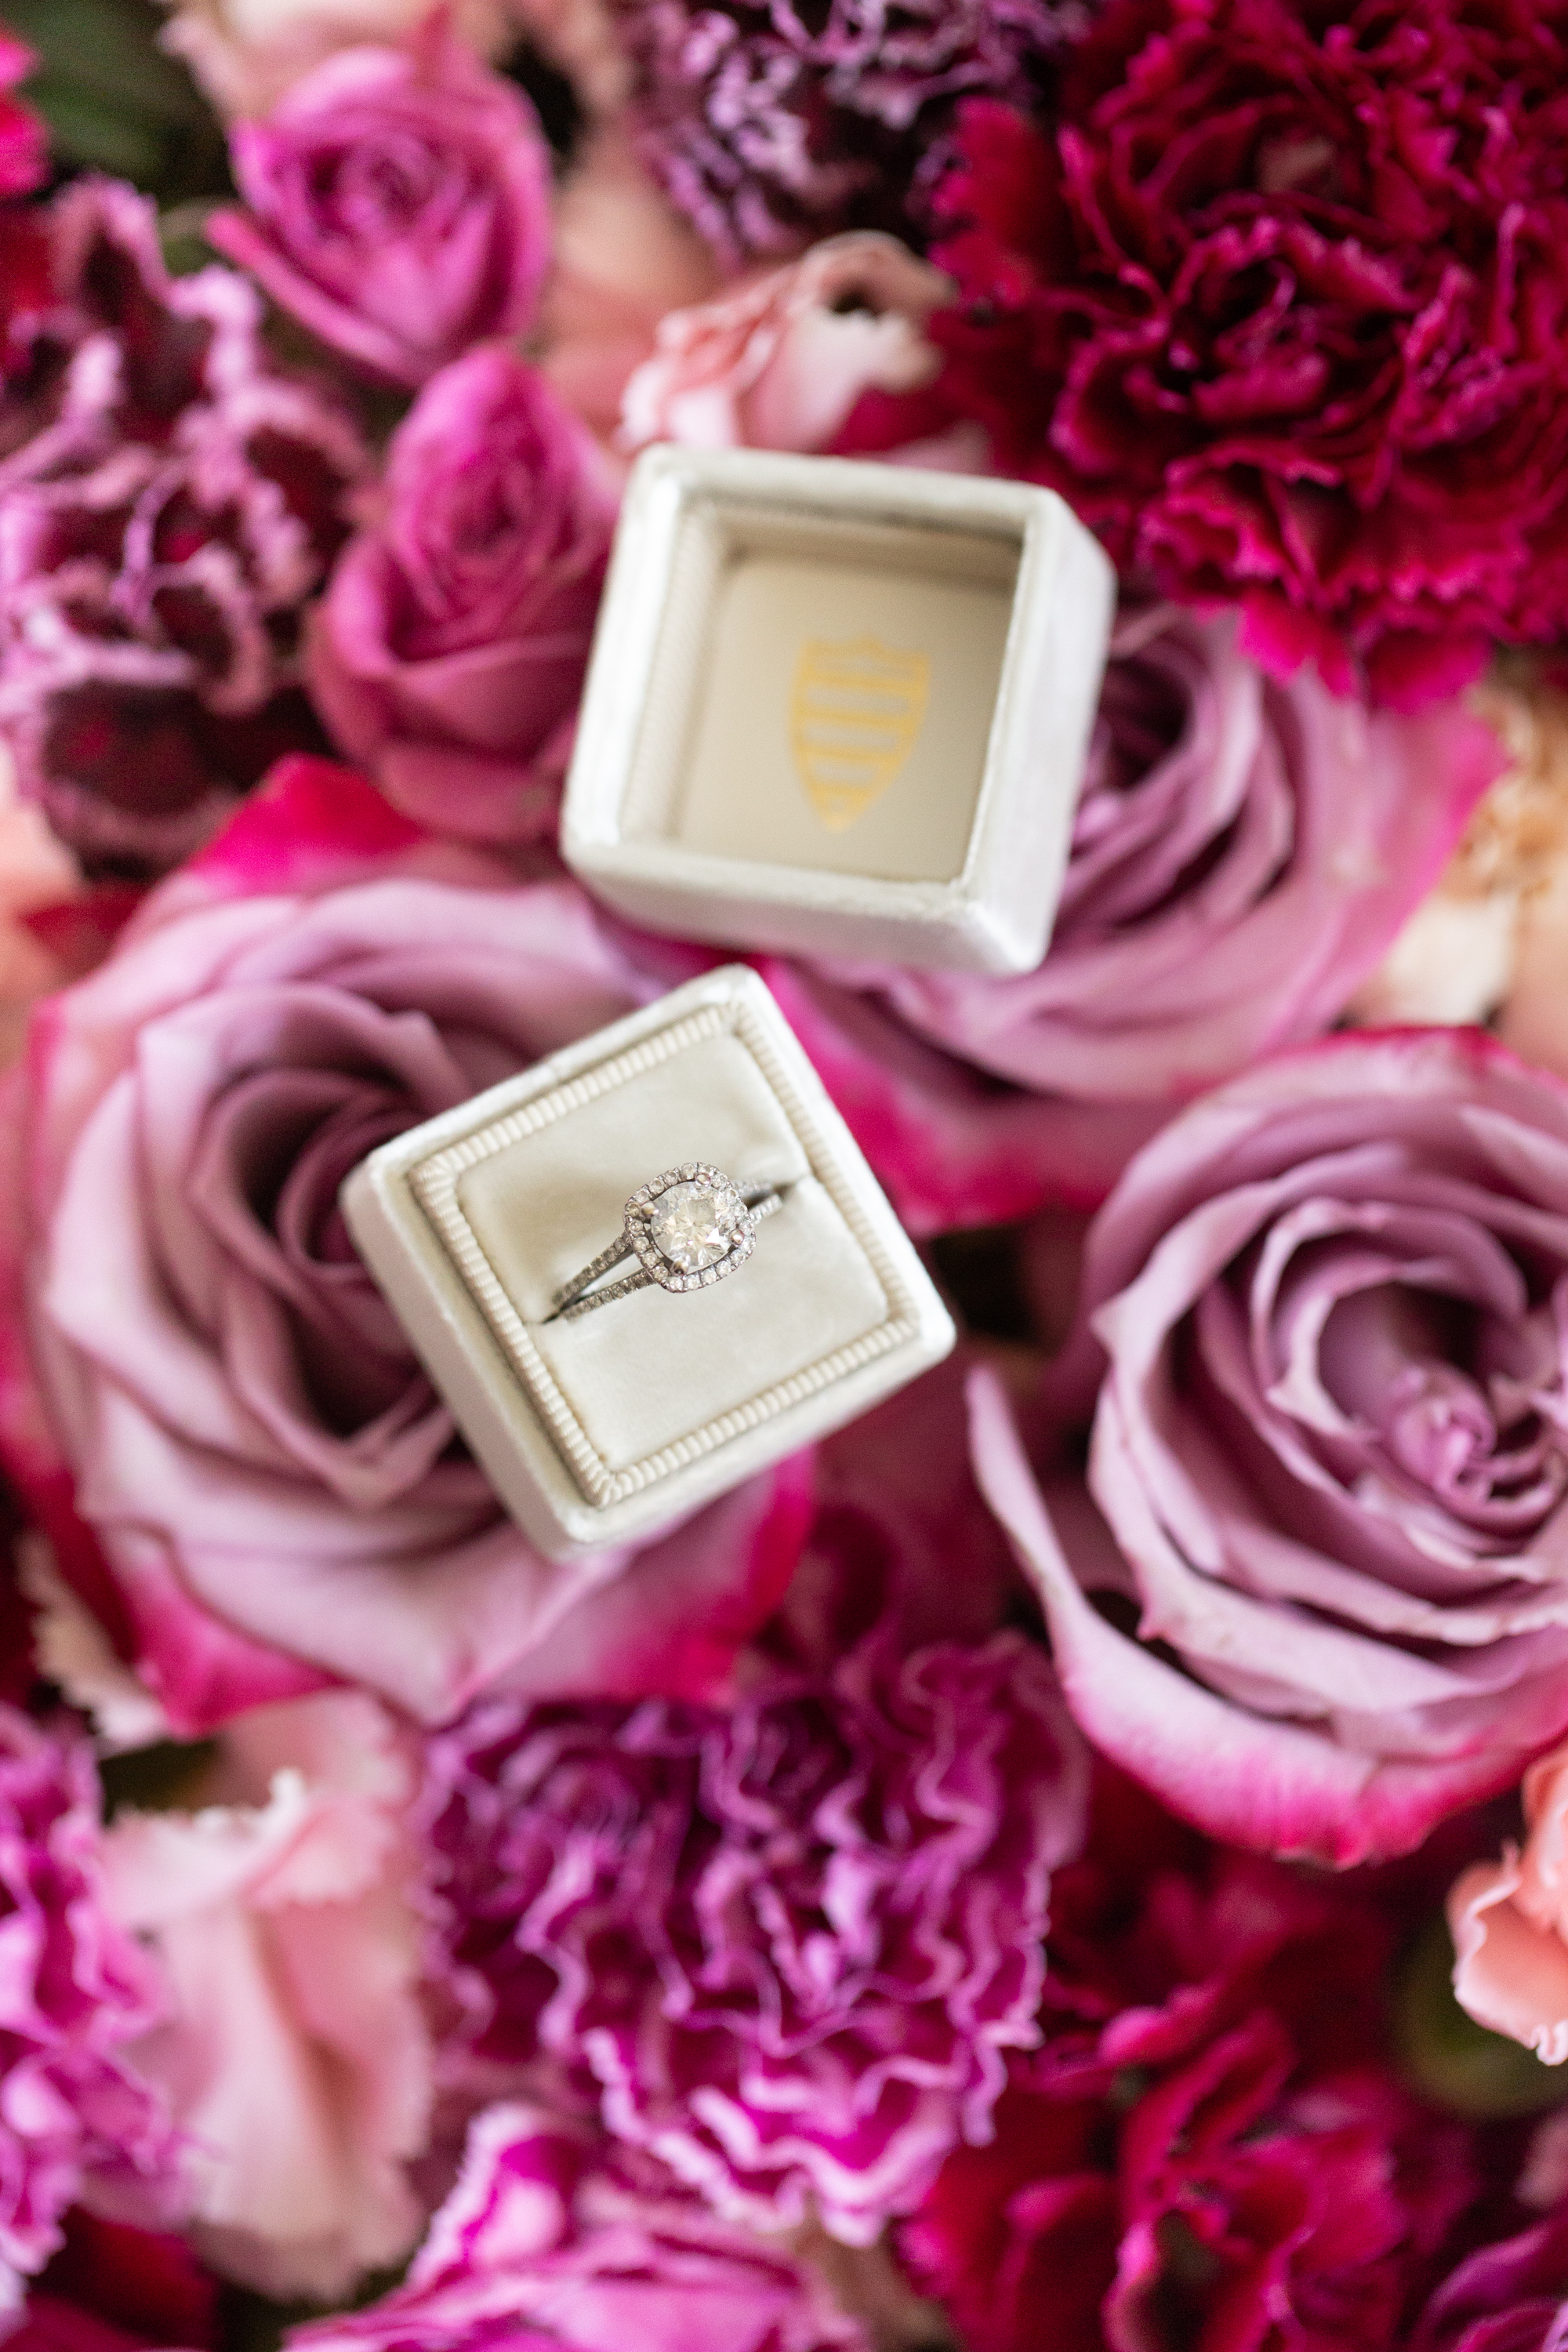 The Mrs Box is the perfect bridal gift!